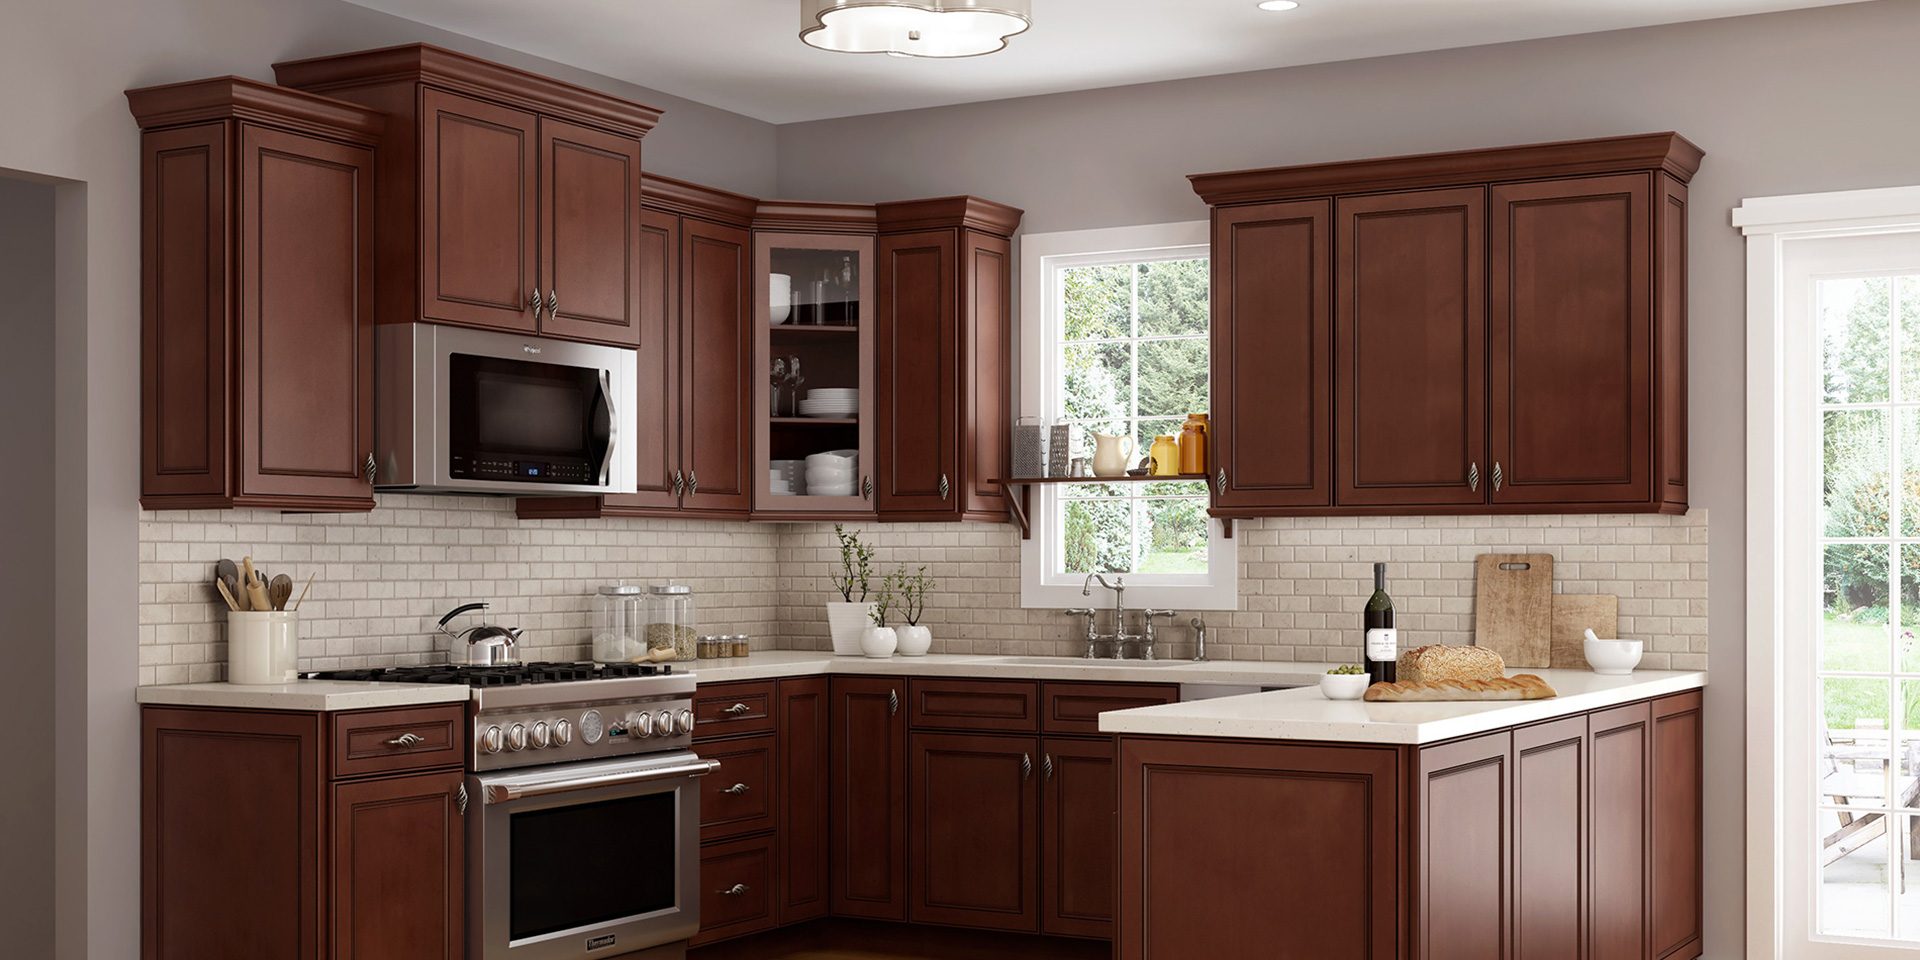 Wholesale Kitchen Cabinets For Dealers - CabinetCorp